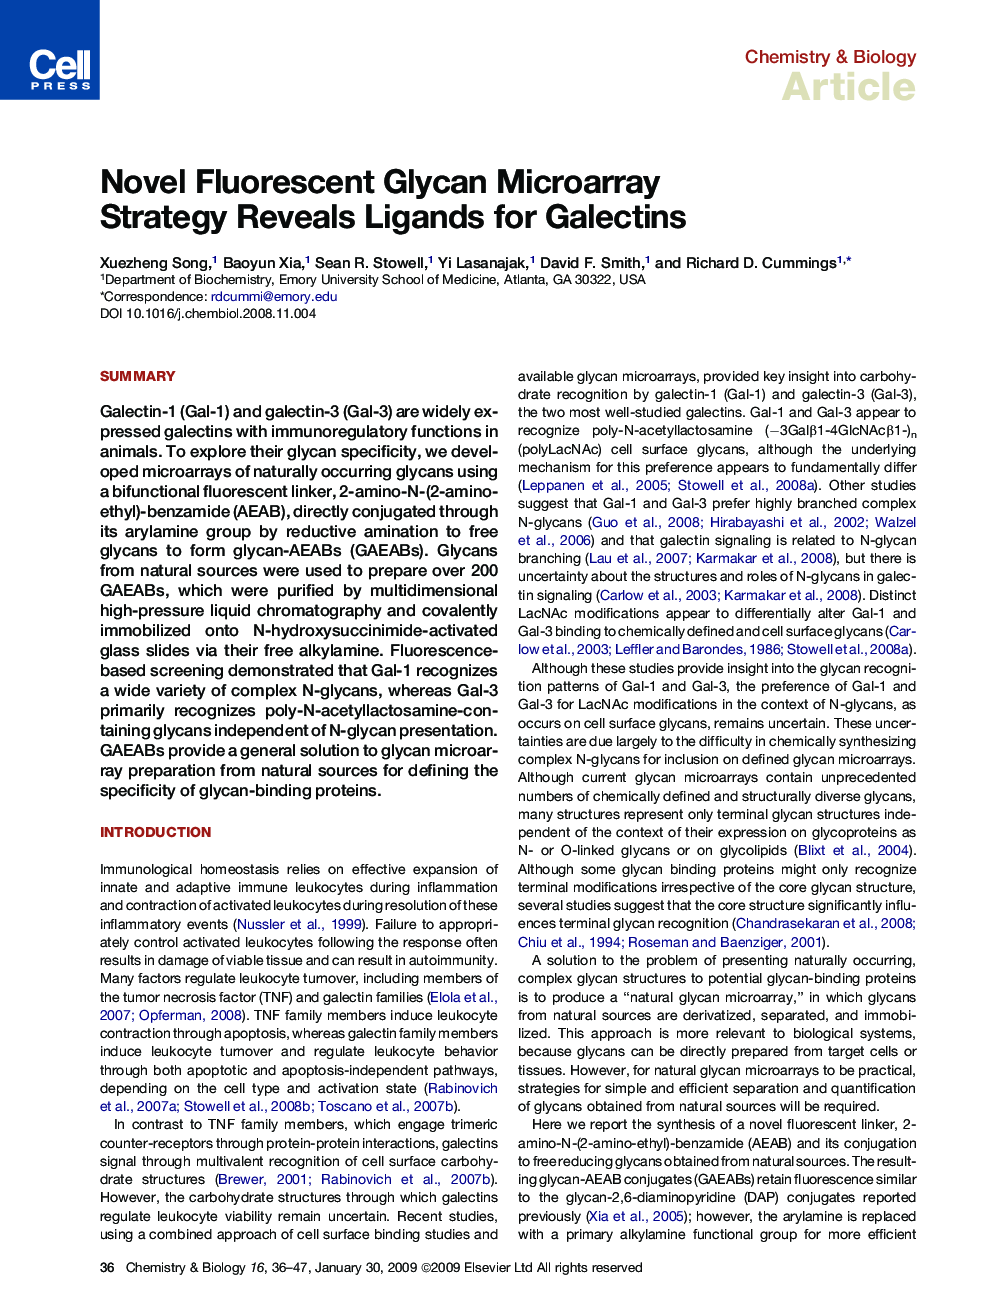 Novel Fluorescent Glycan Microarray Strategy Reveals Ligands for Galectins